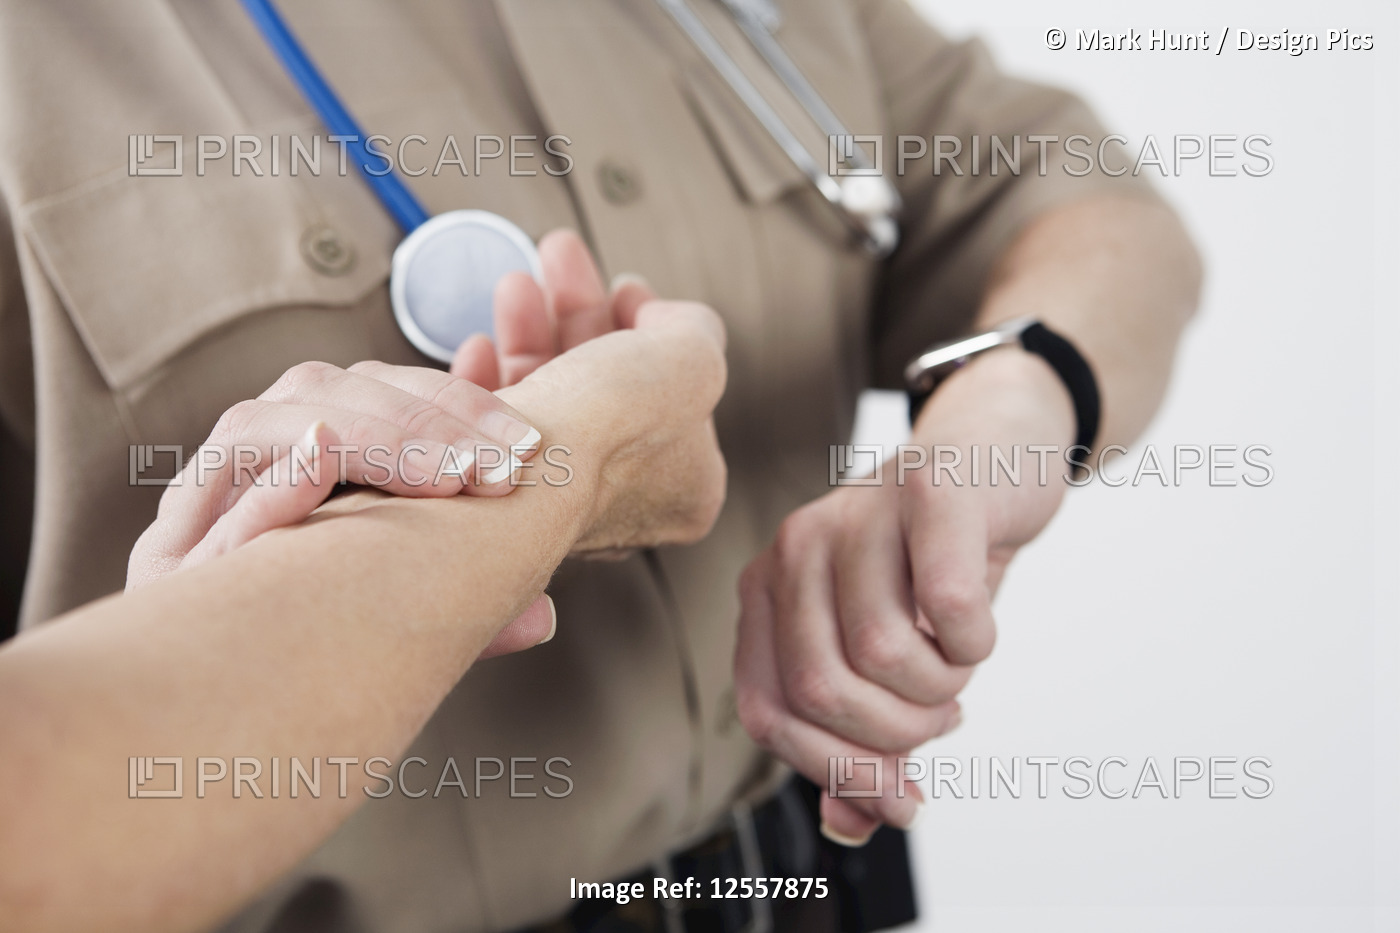 View of Emergency Medical Service officer checking the pulse of a patient